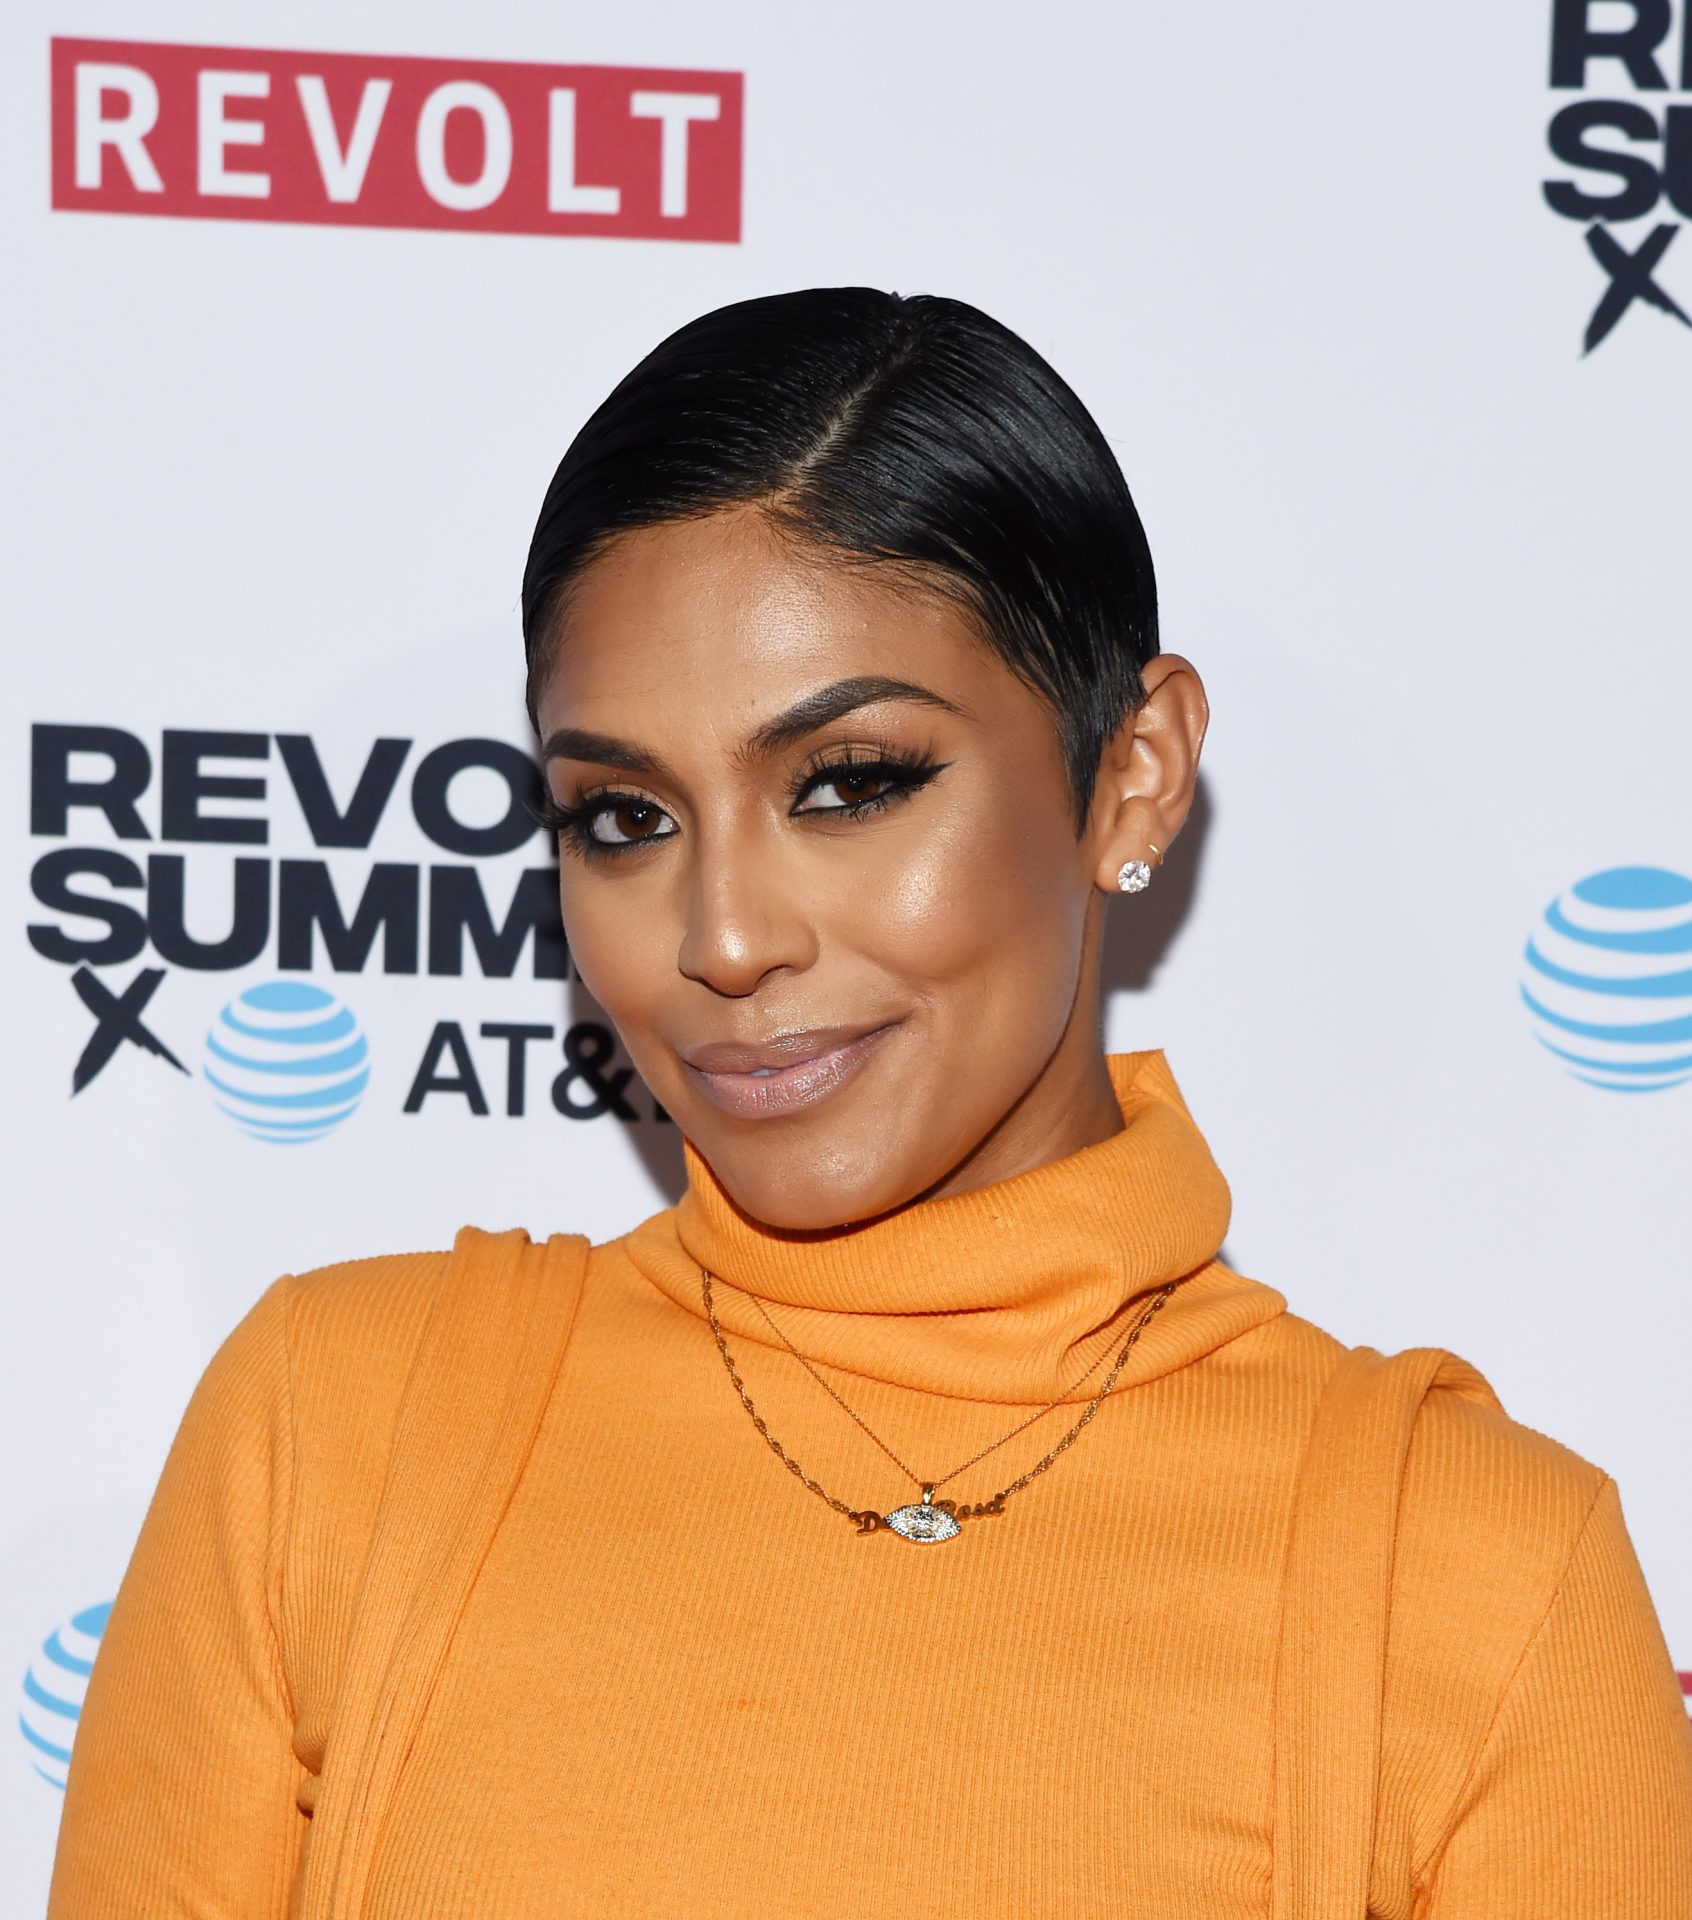 Abby De La Rosa Is Acquainted With “Just One” Other Mother Of Nick Cannon’s Children While Pregnant Again